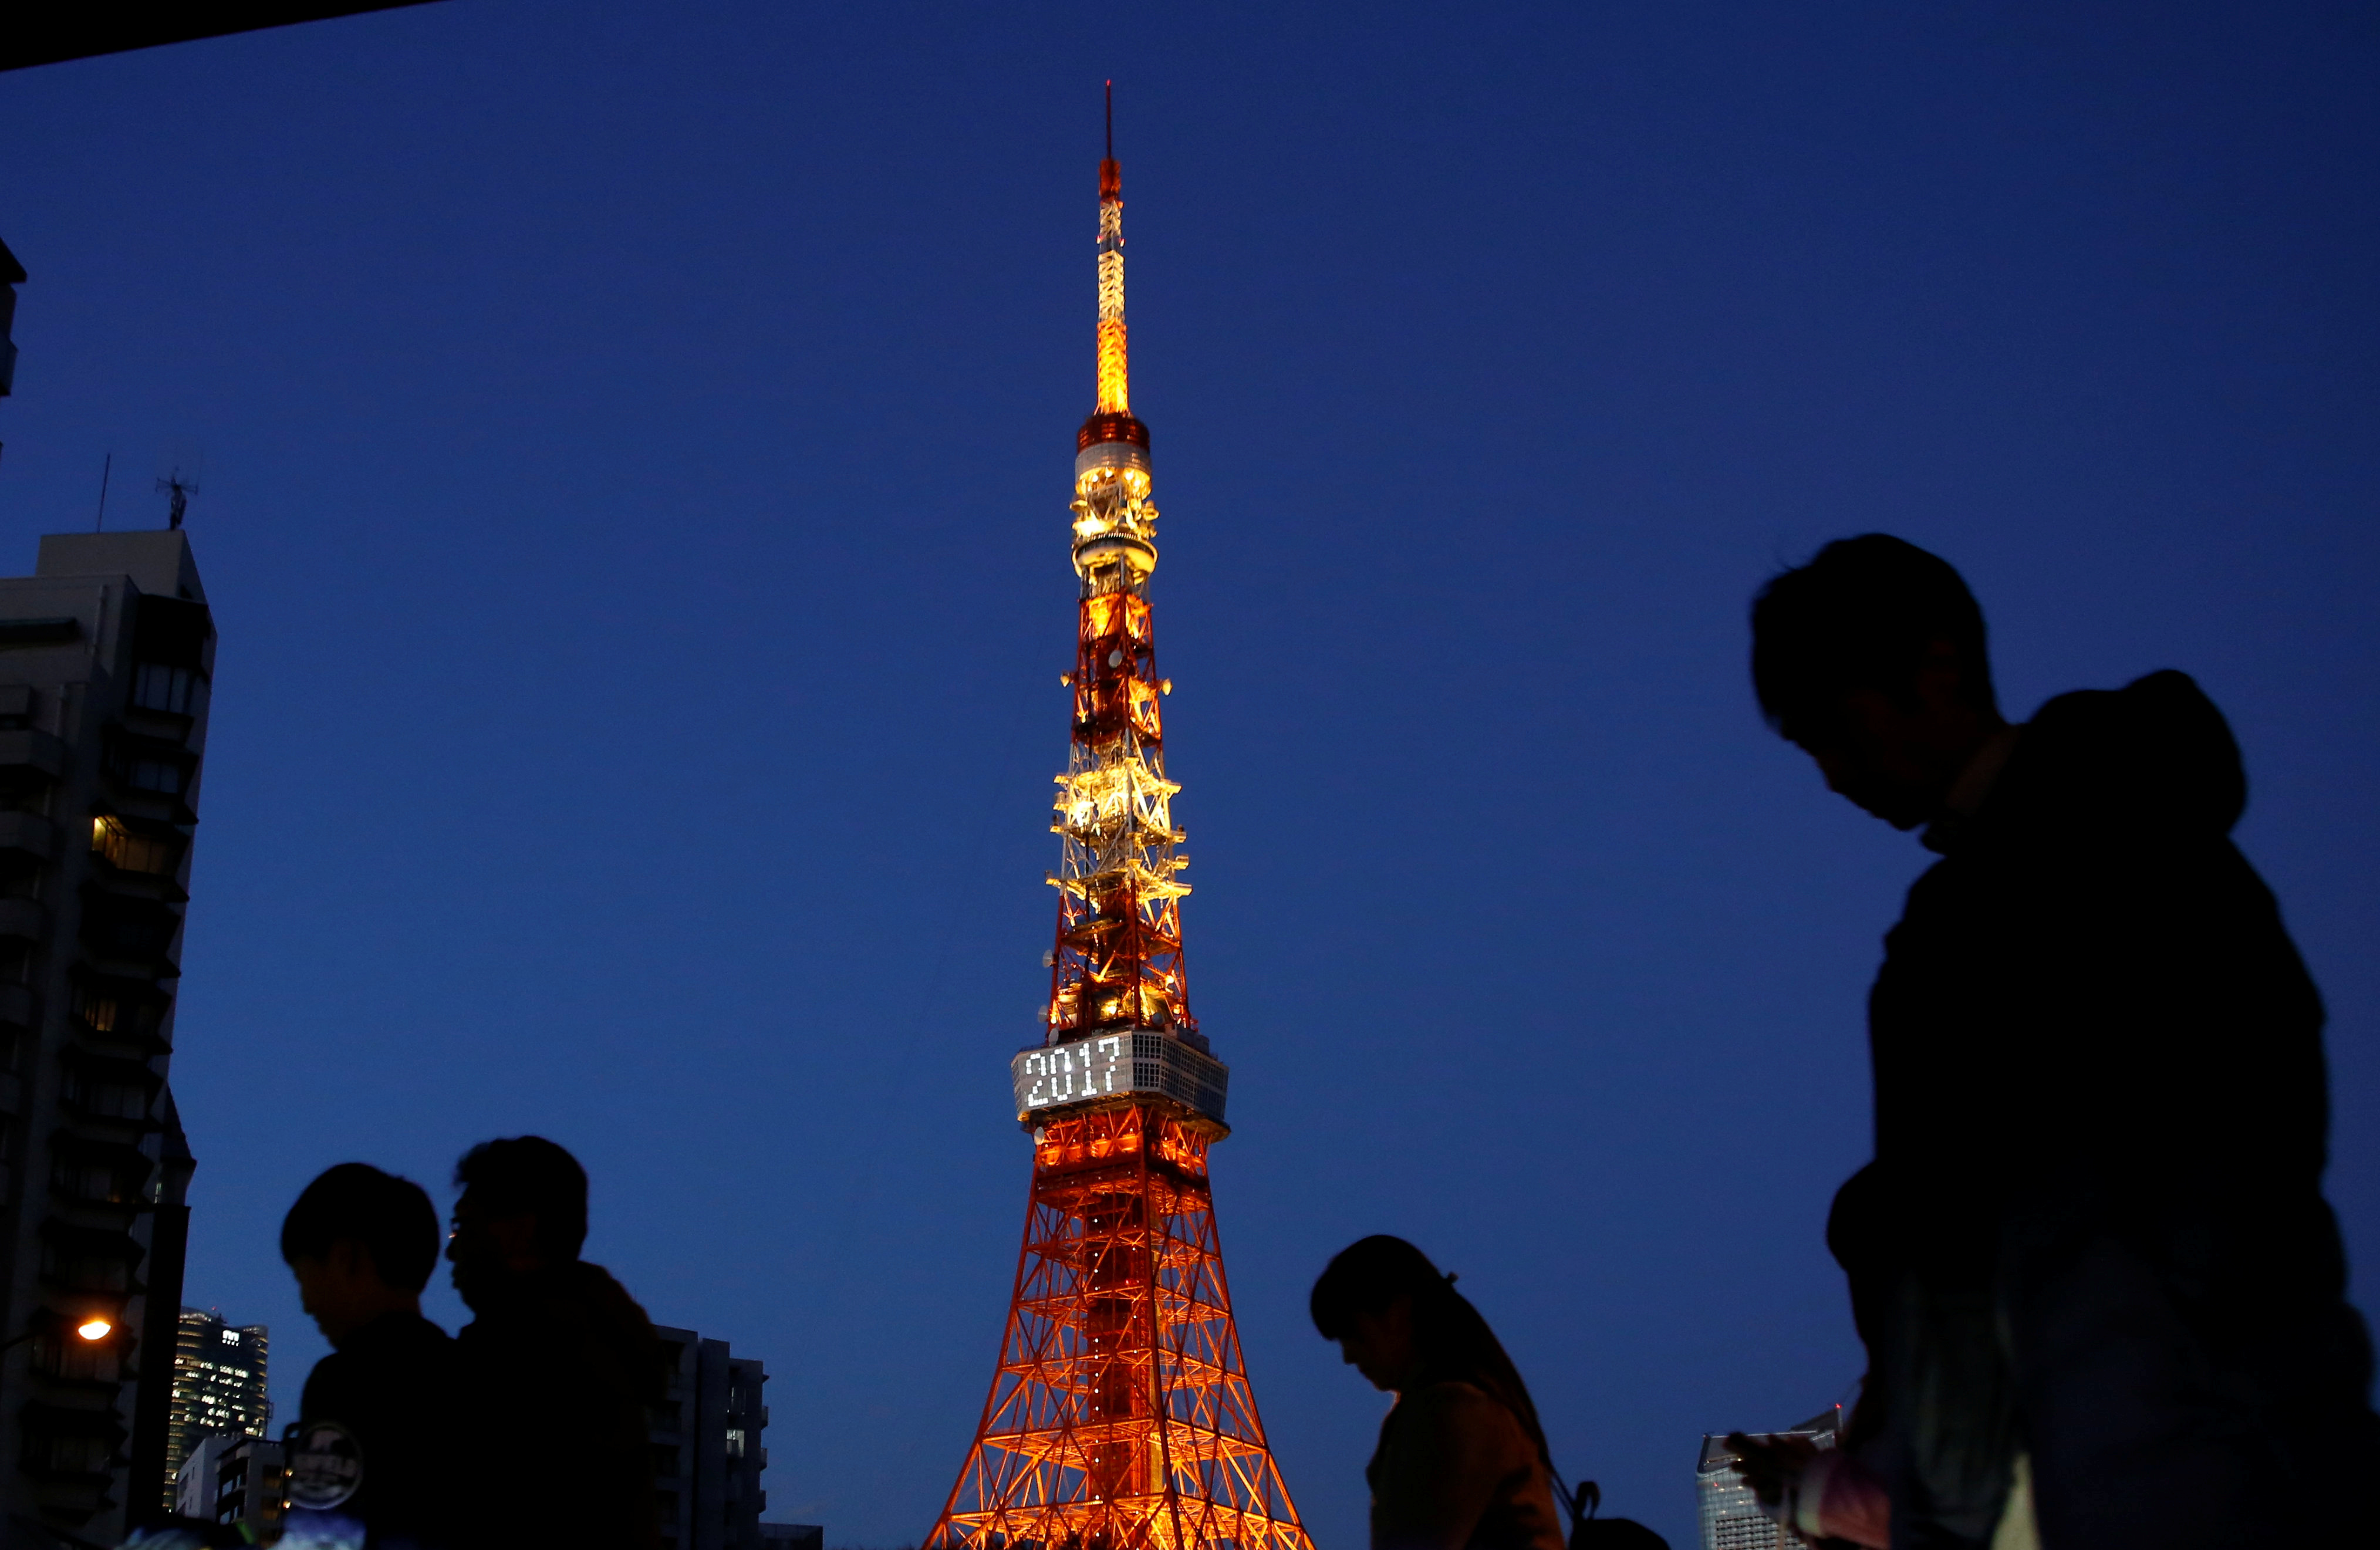 Pedestrians are silhouetted as they walk past the Tokyo Tower in Tokyo